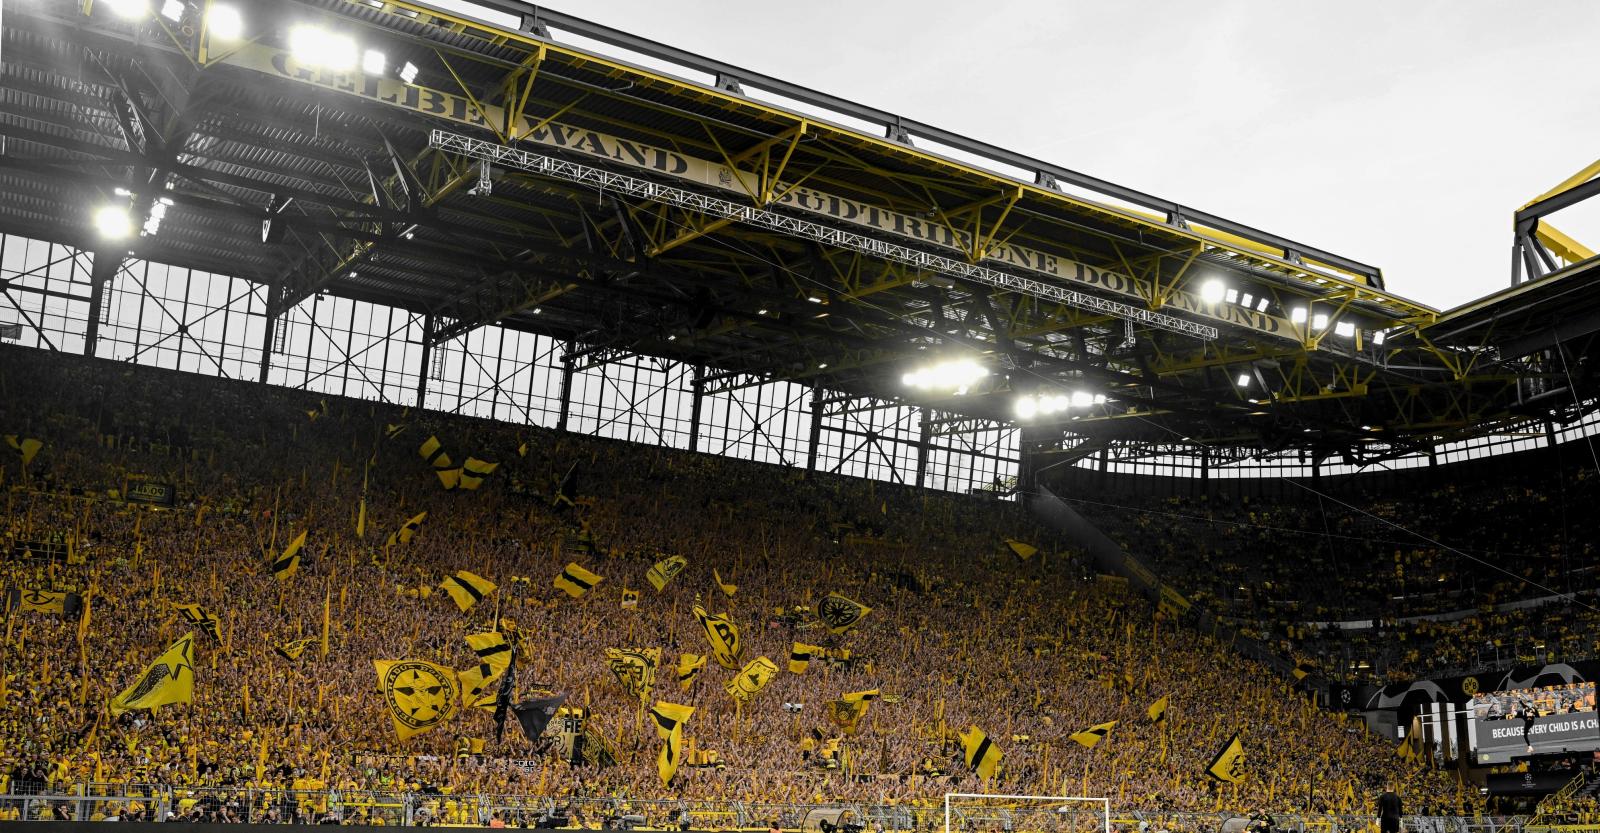 Borussia Dortmund's achievement was celebrated by fans of other German clubs